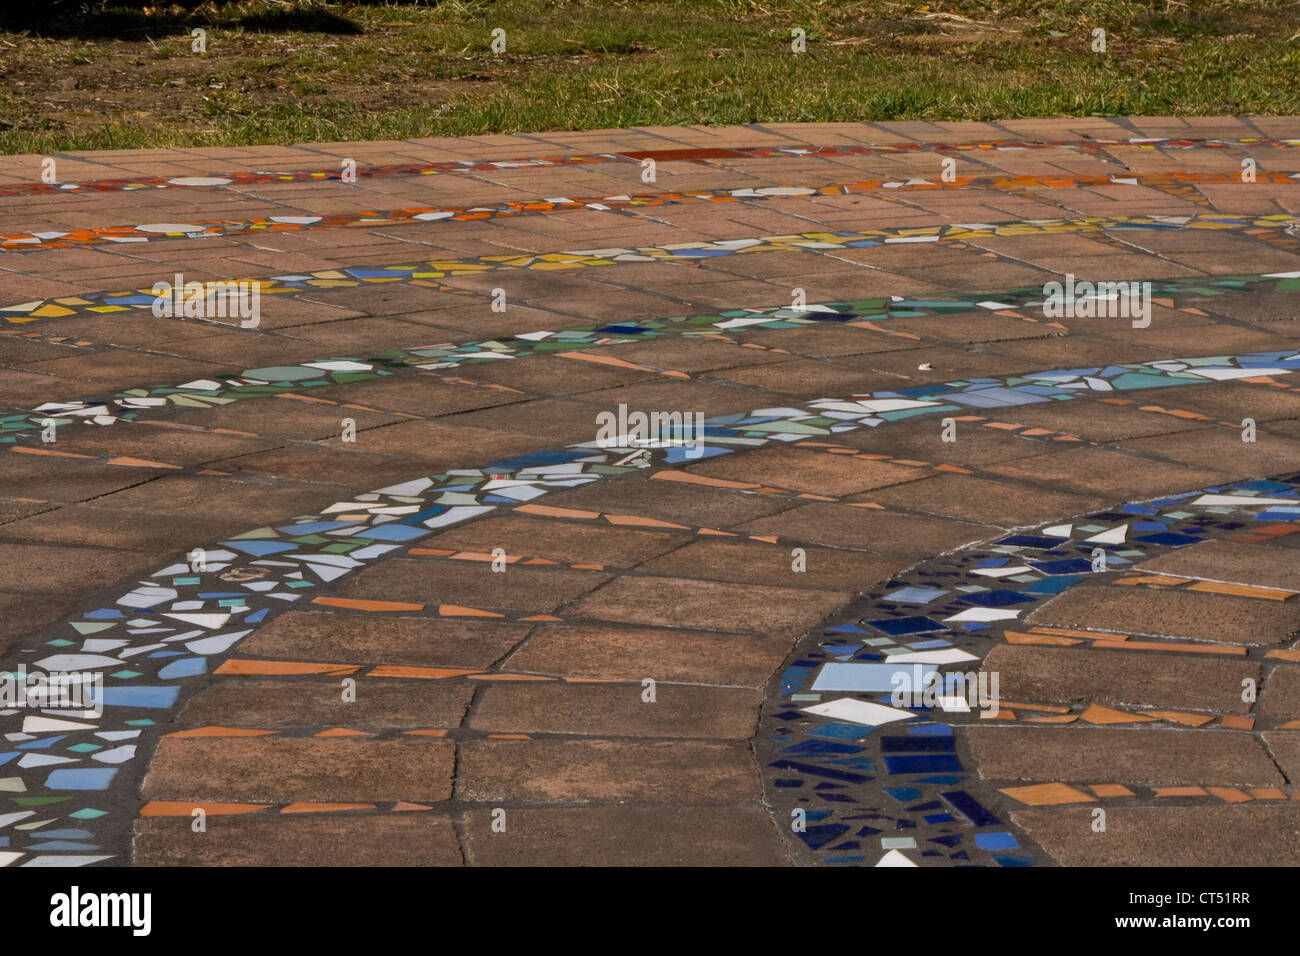 Coloured tile pattern in circular paving Stock Photo